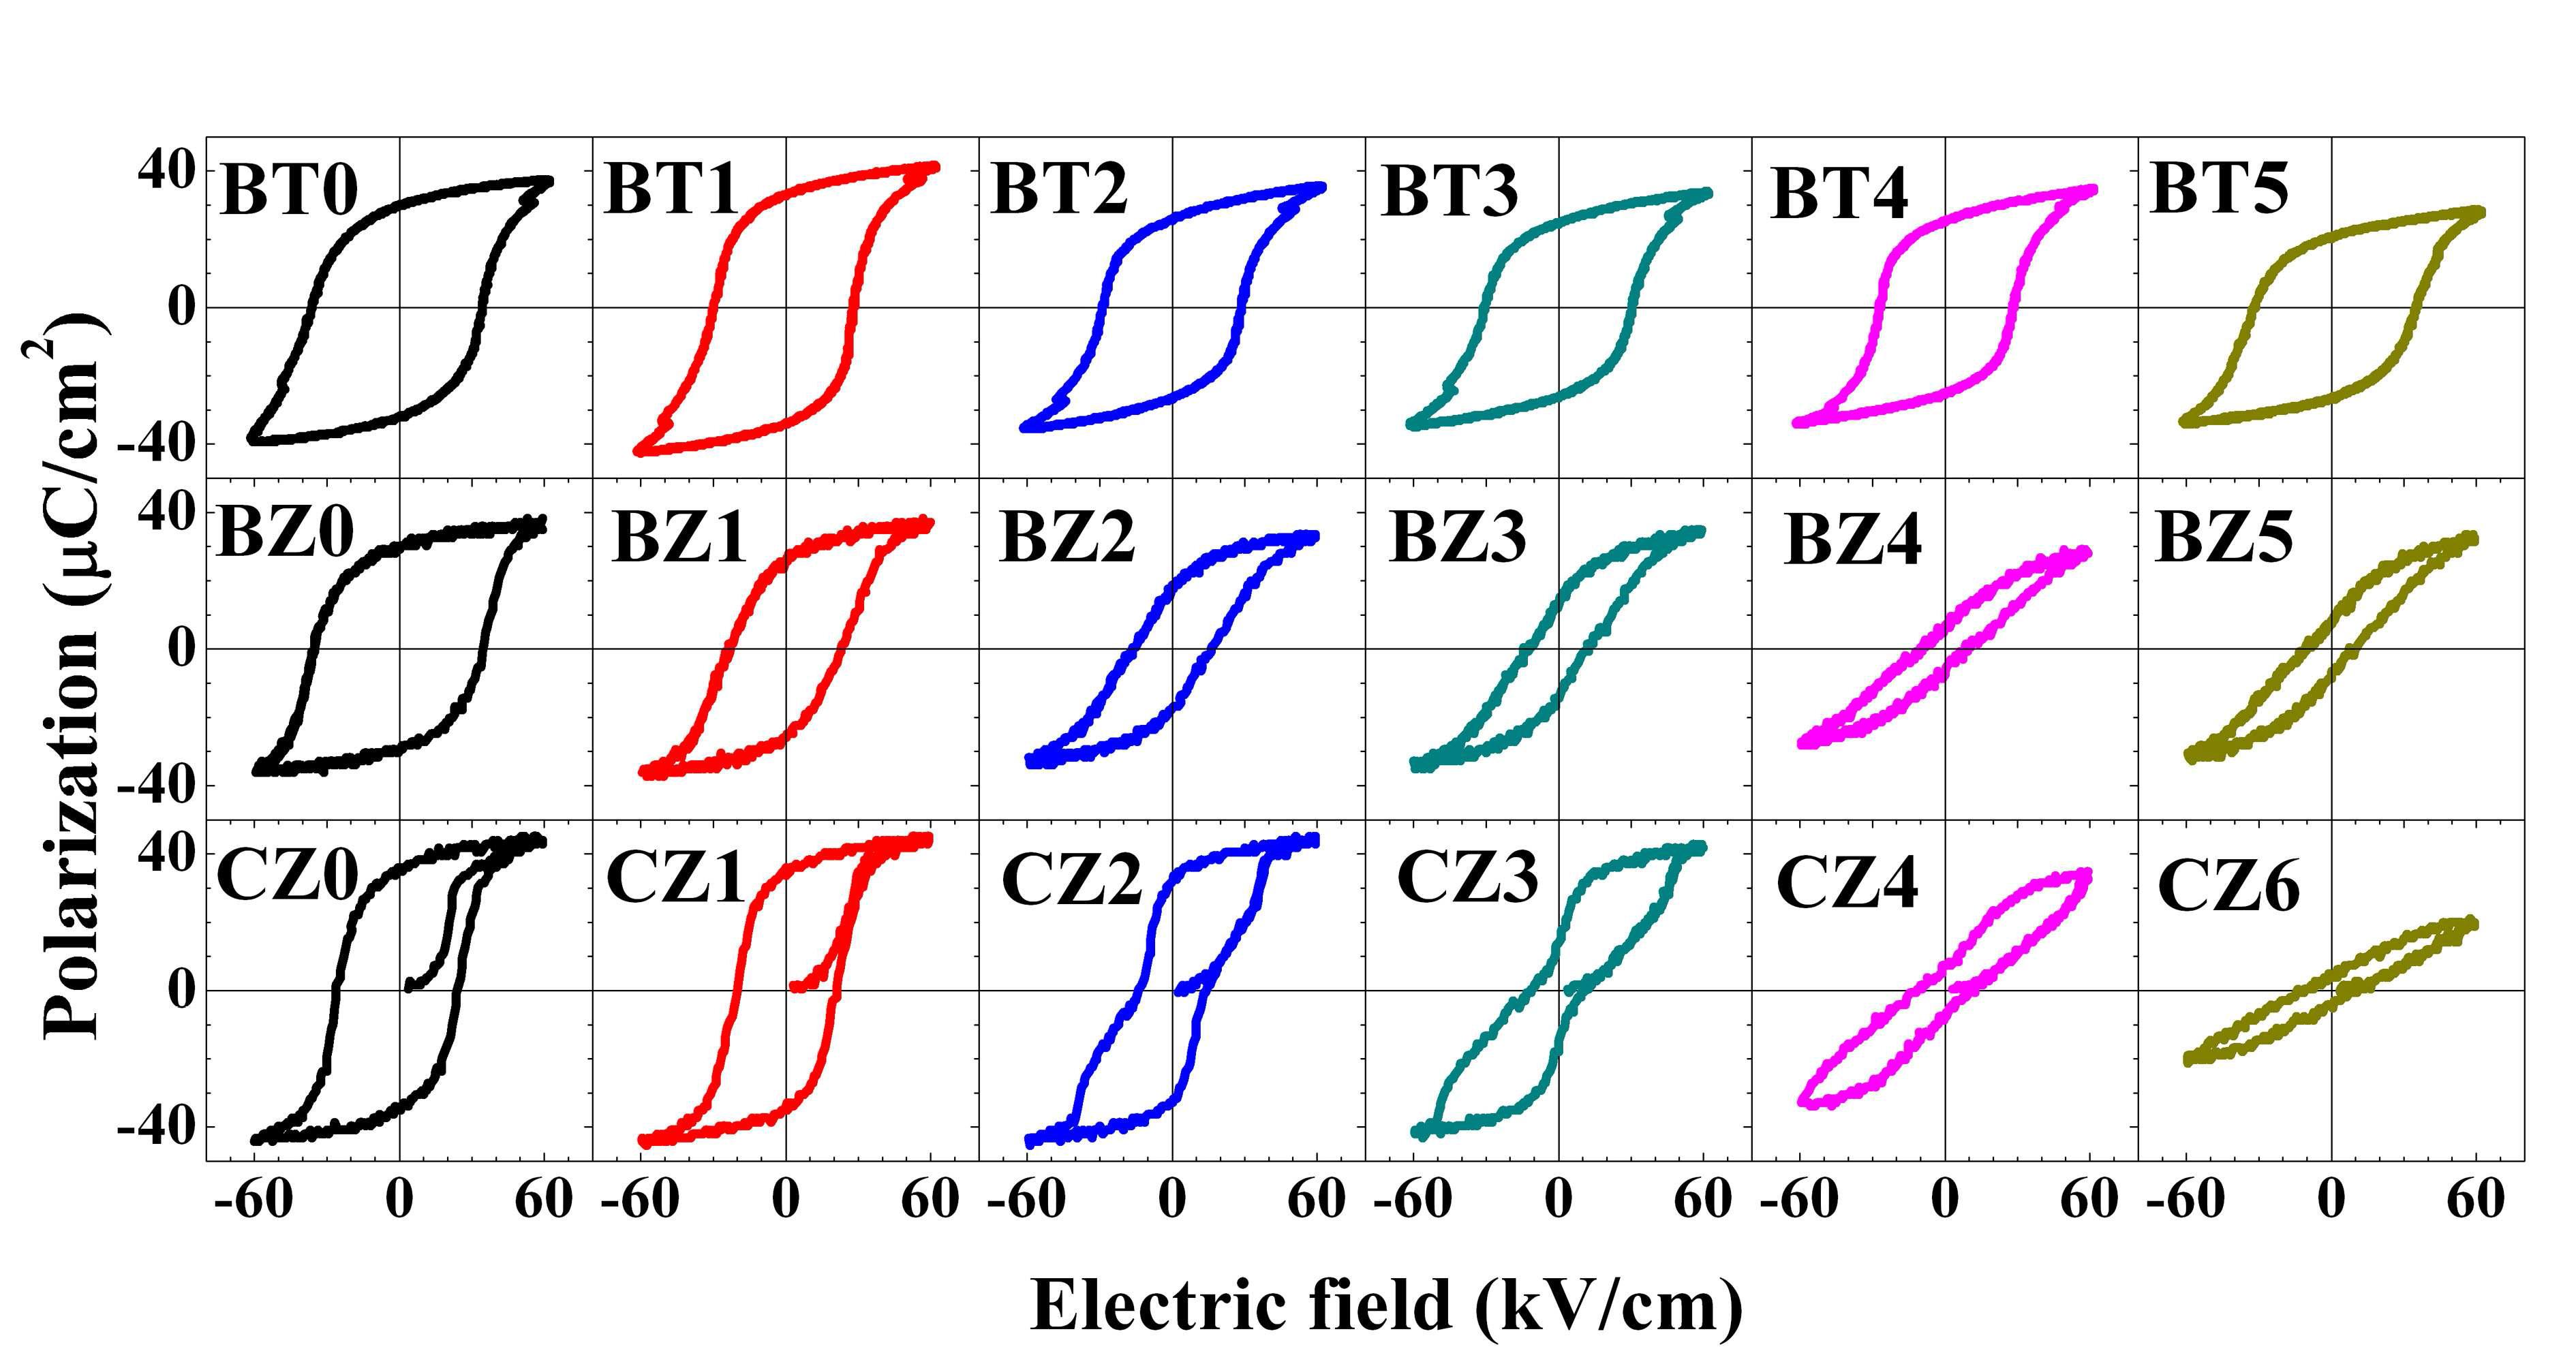 Electric-field-induced polarization (P-E) hysteresis loops of BNKT ceramics modified with different ABO3 compounds as a function of modifier content.